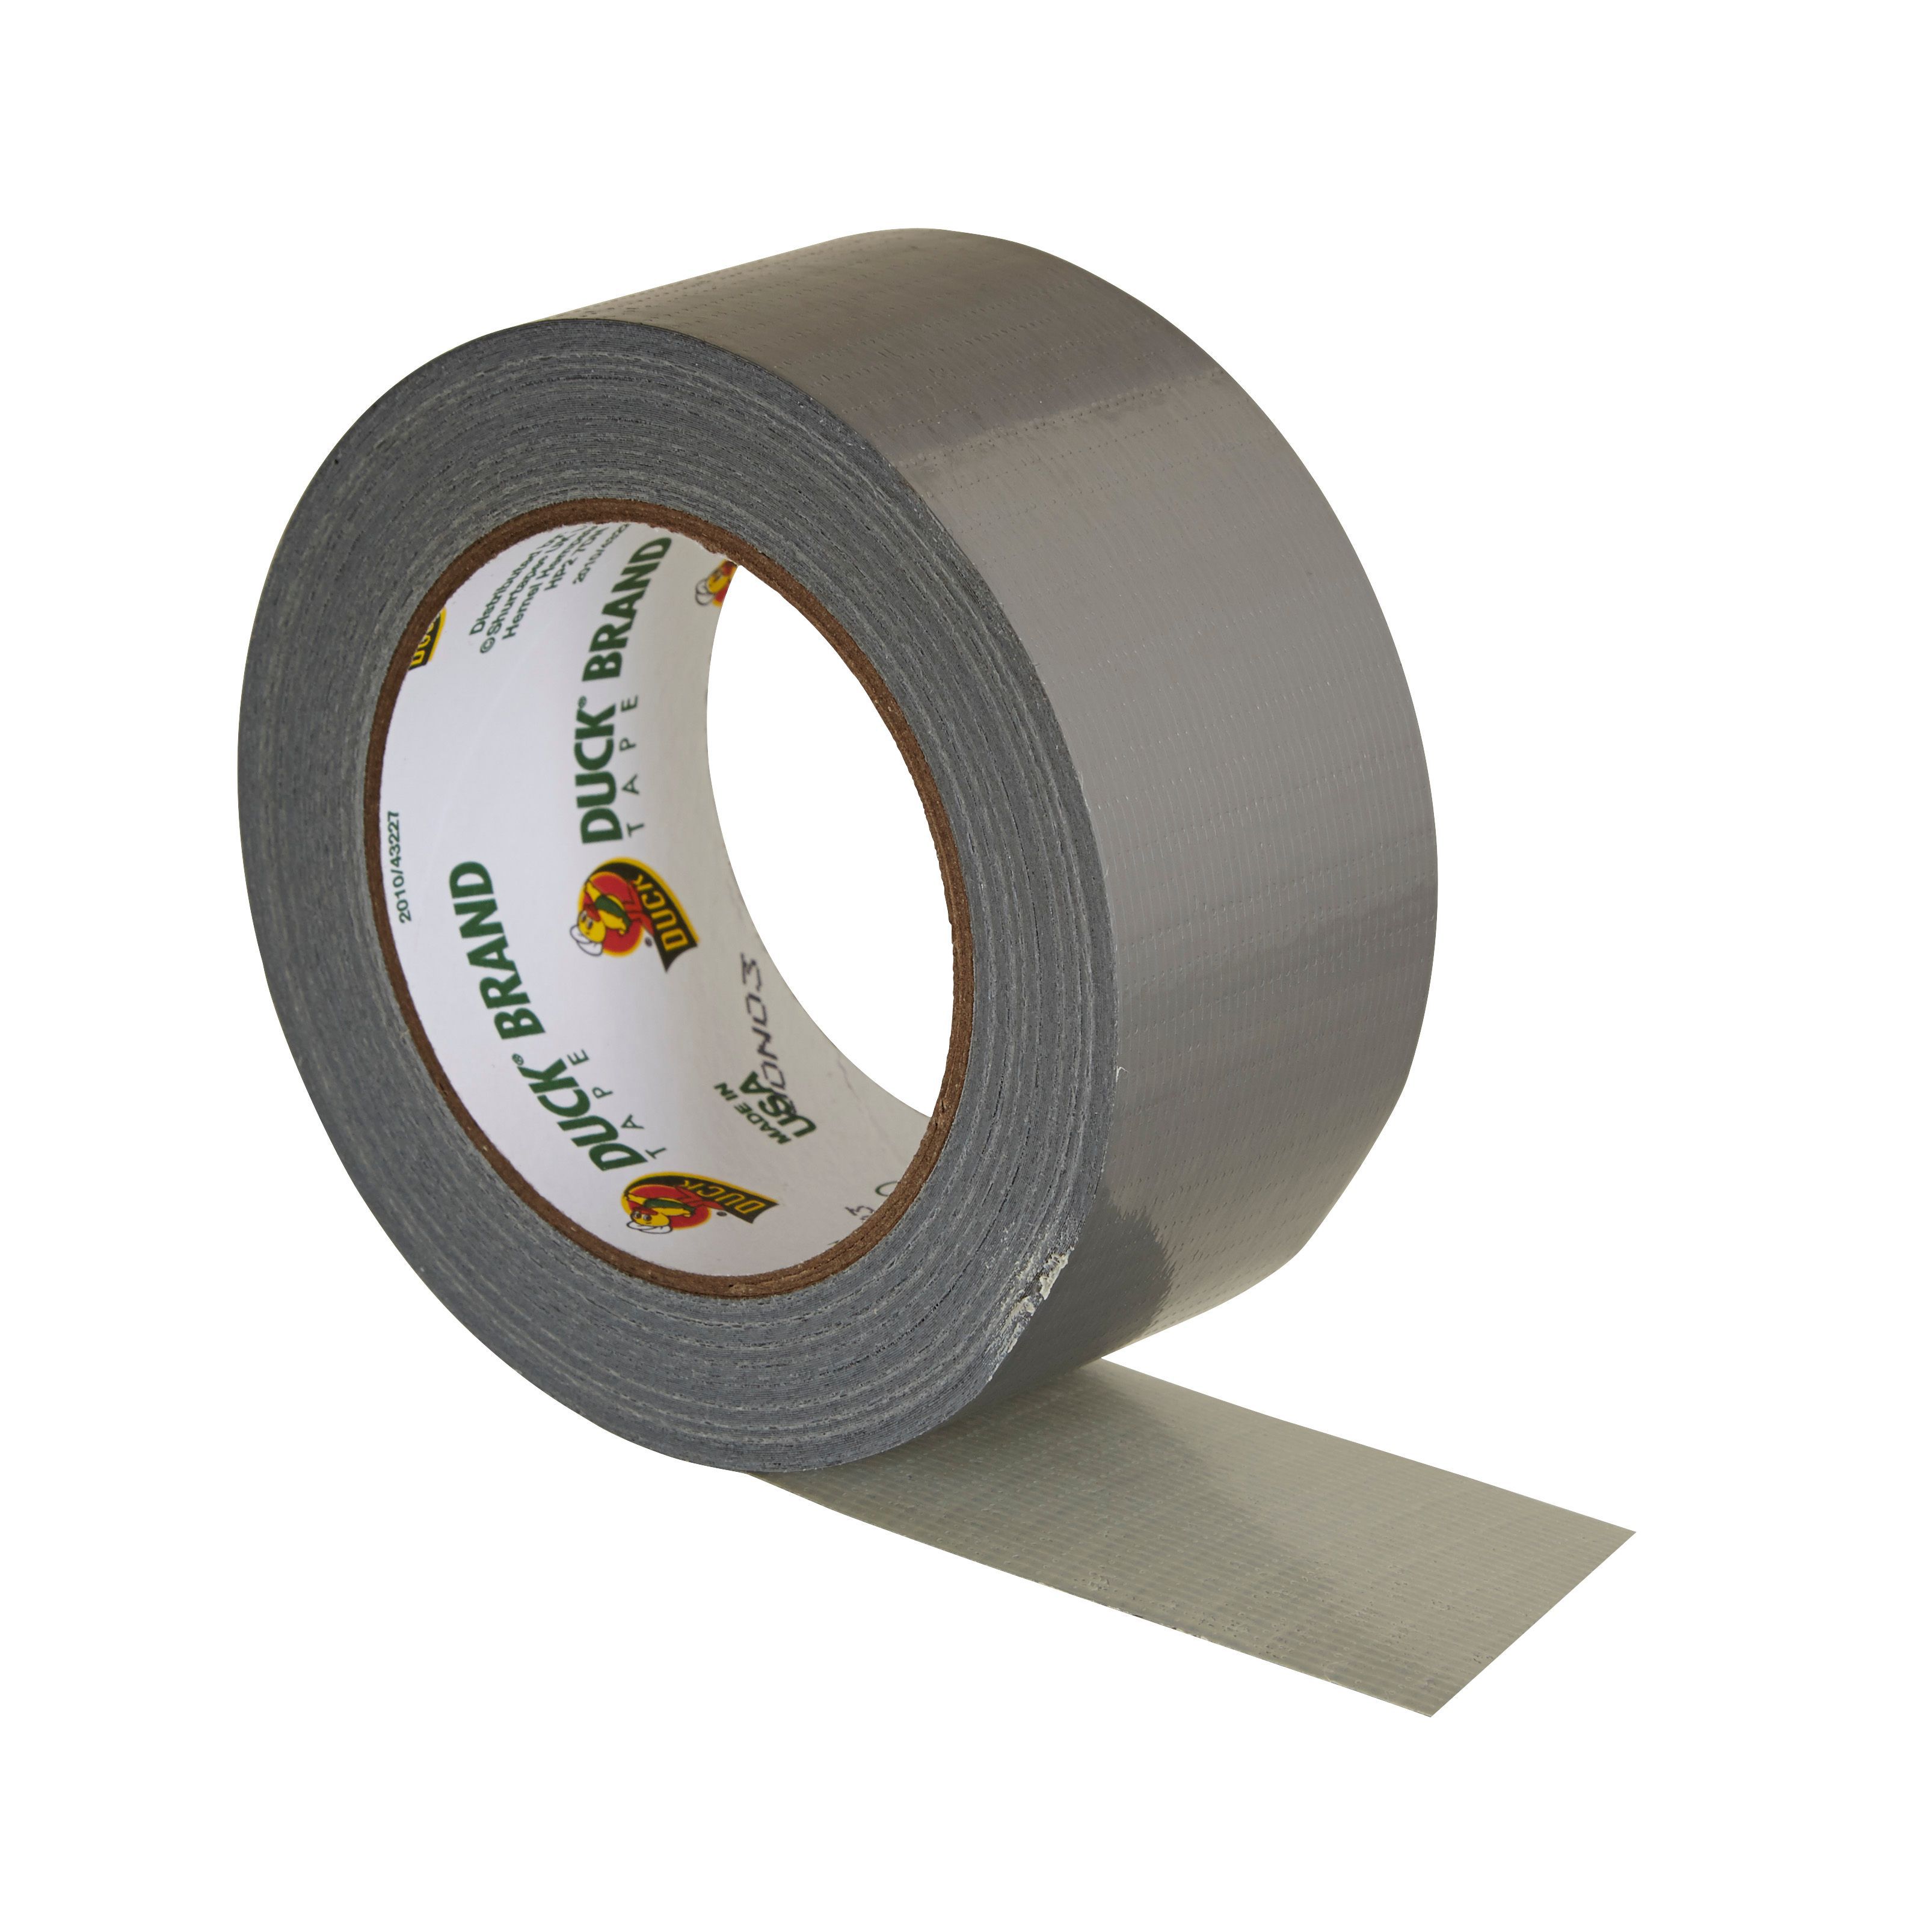 Double Sided Cloth Tape 50Mm X 25M   Builders Merchant & DIY  Store. Serious about Service!